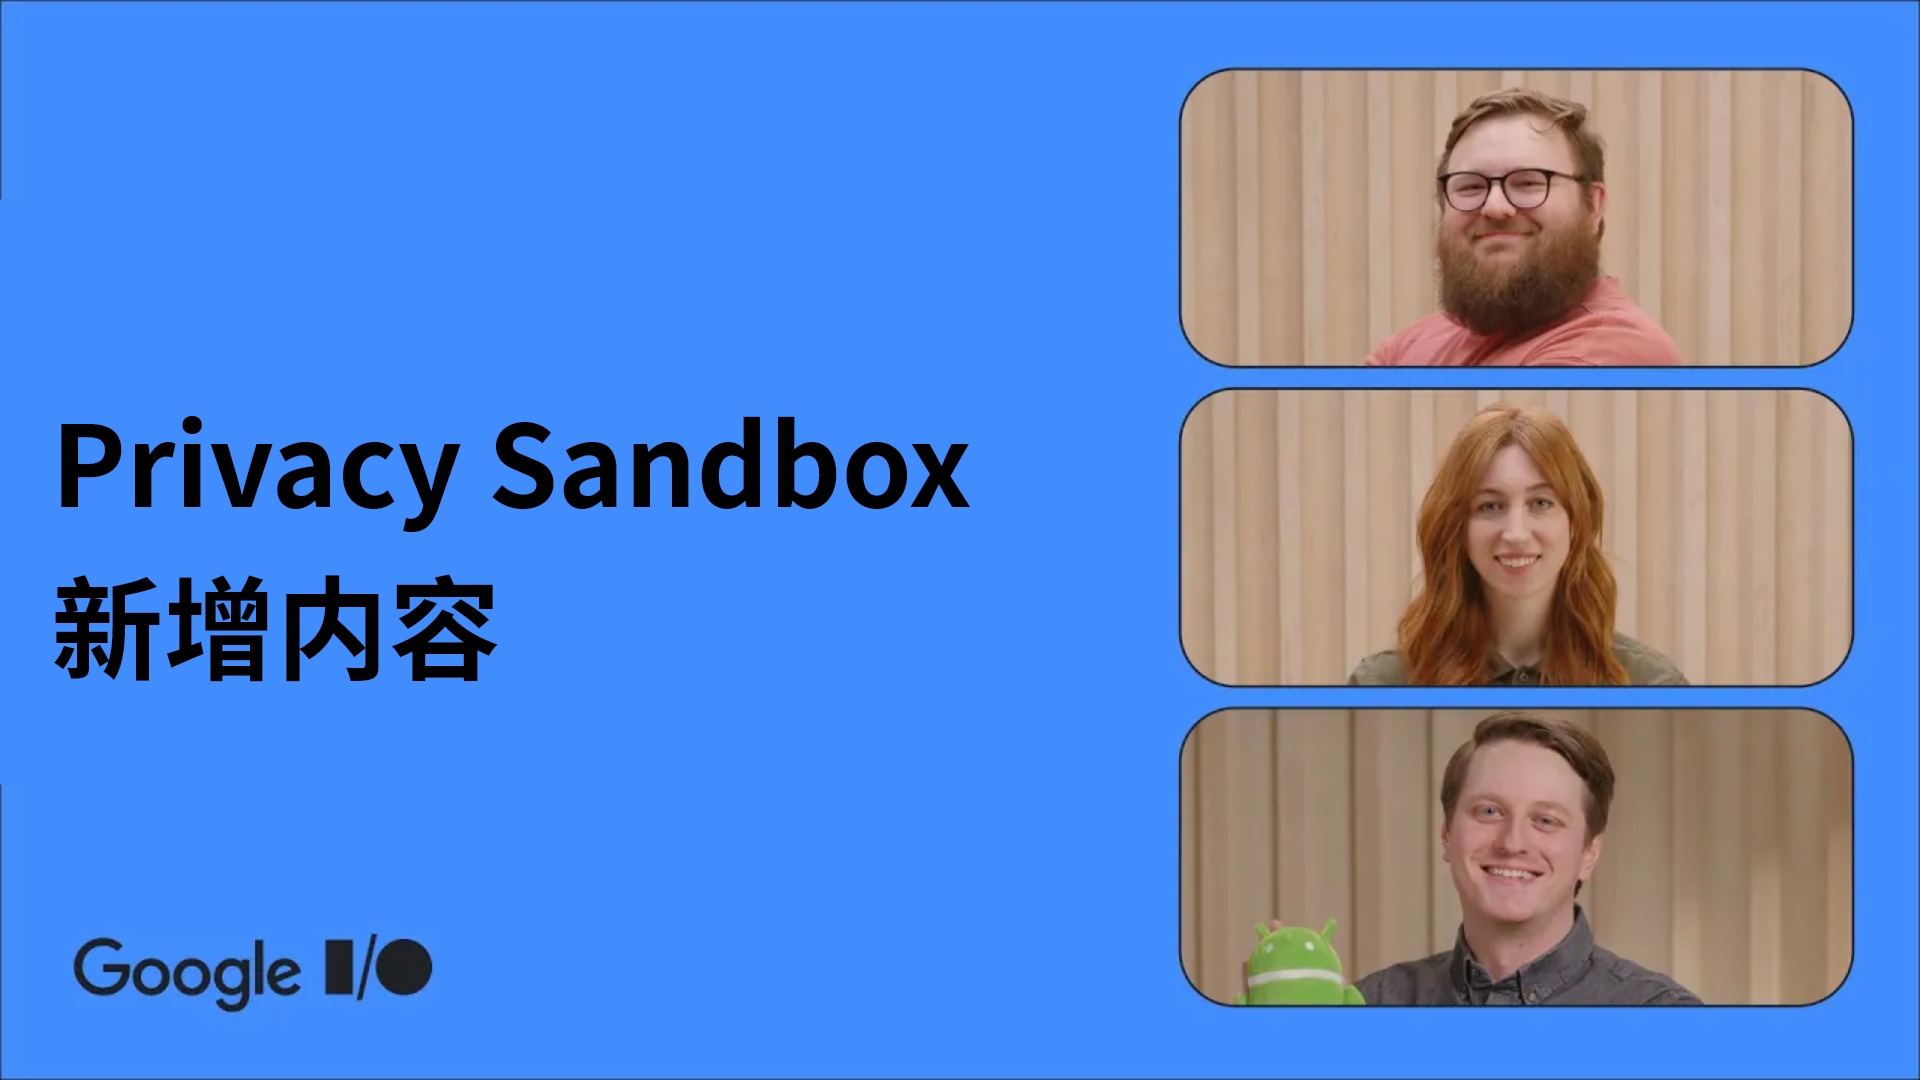 [IO23_029] What_s new in Privacy Sandbox for Android - Video.jpg